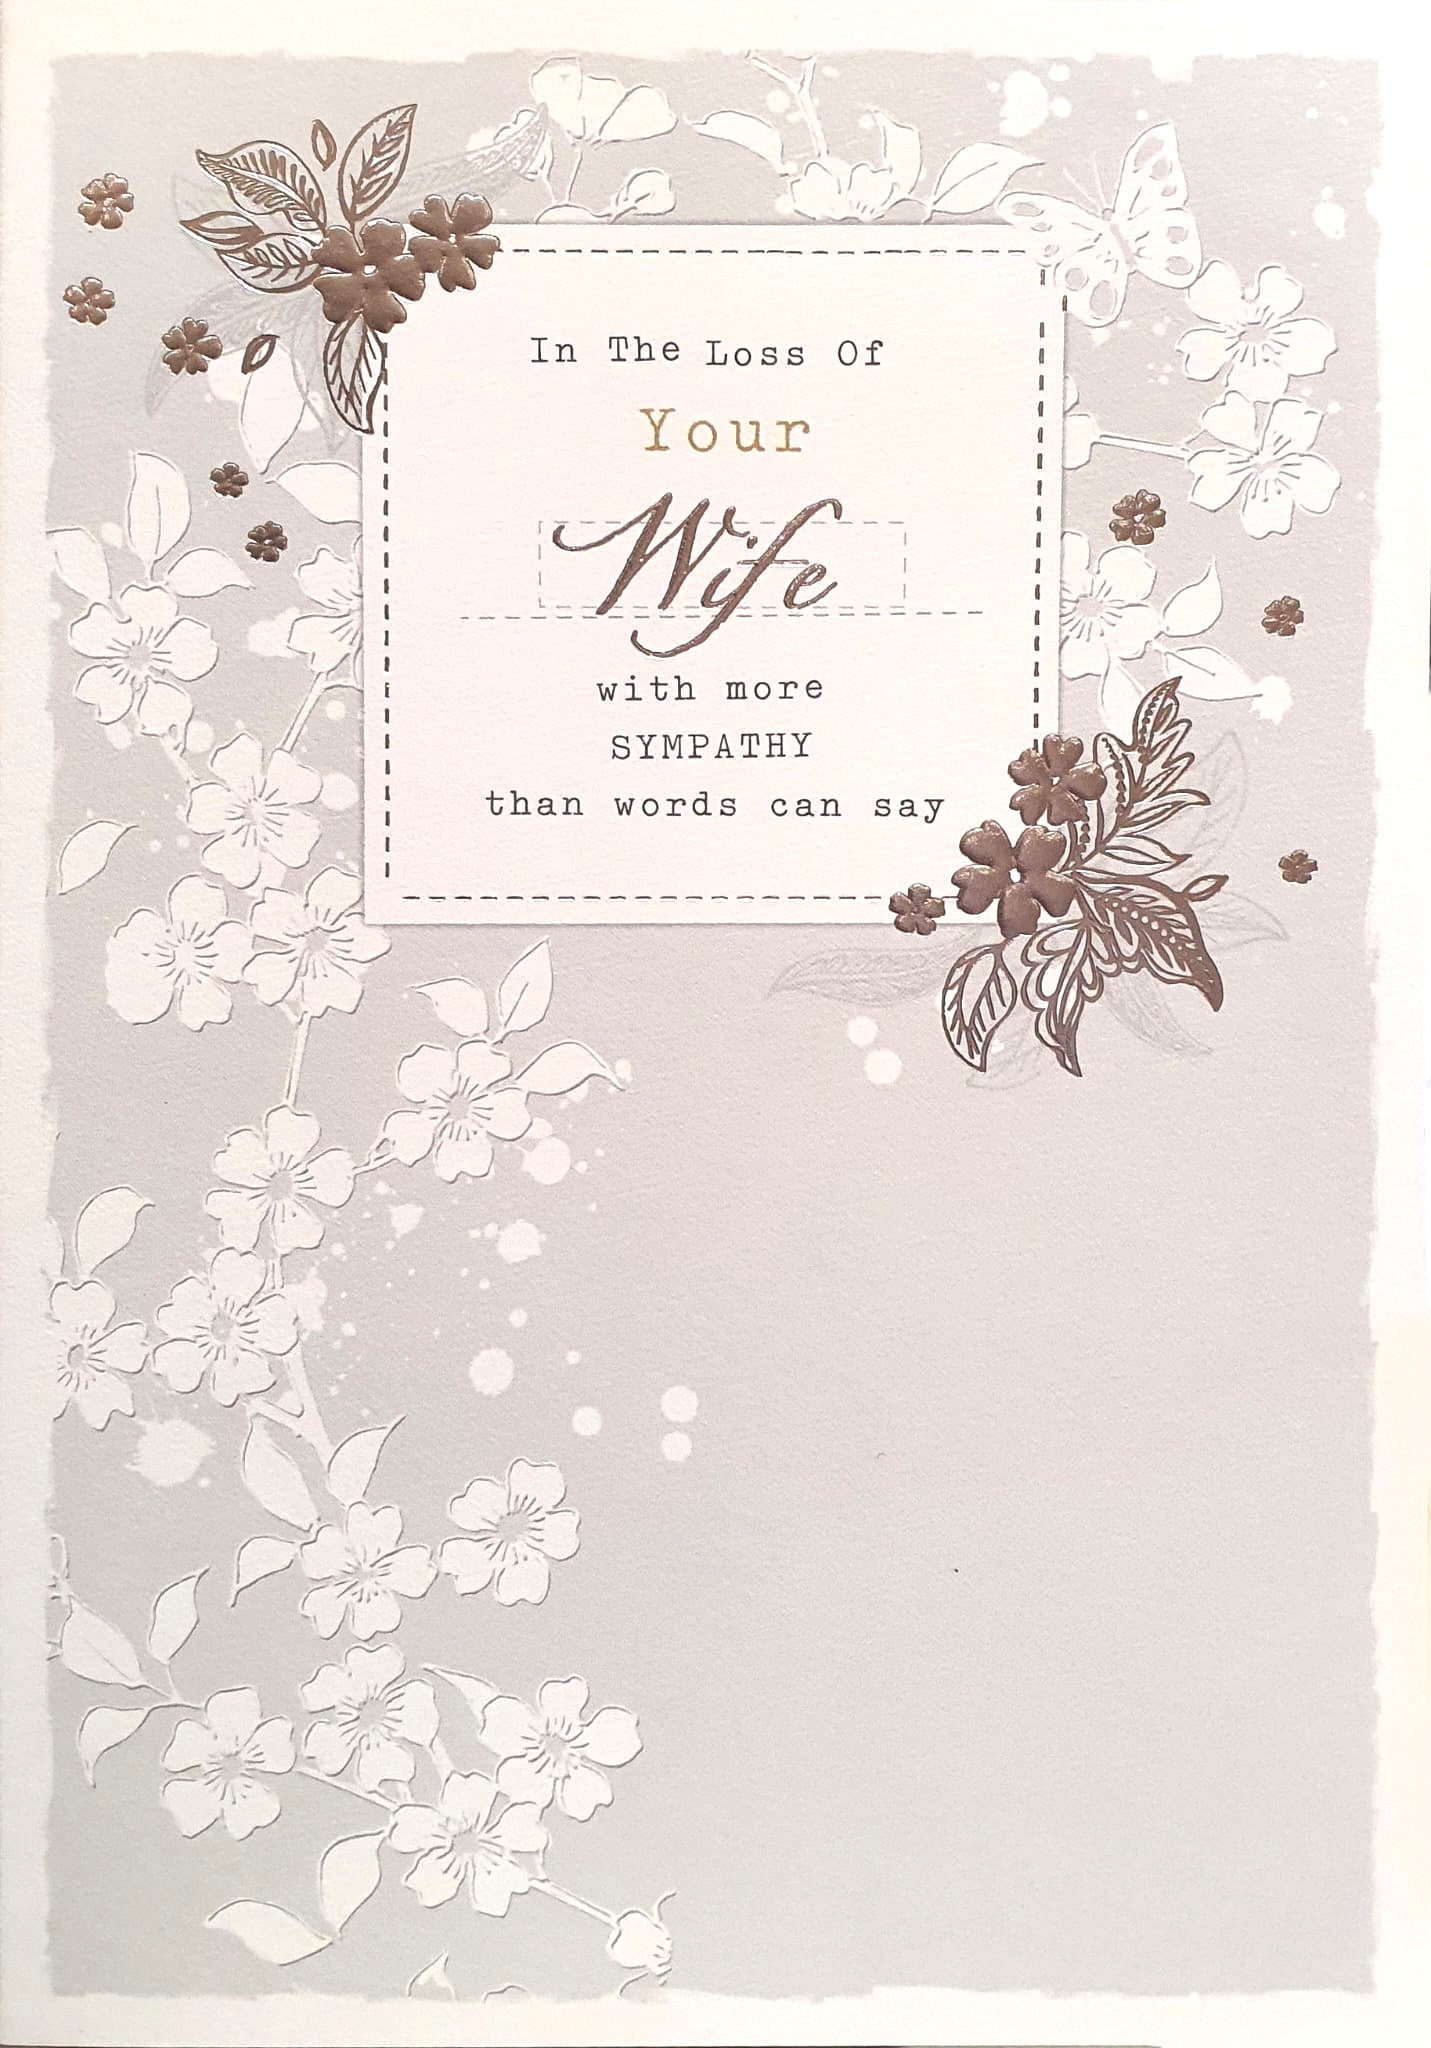 Sympathy Card - In The Loss Of Your Wife